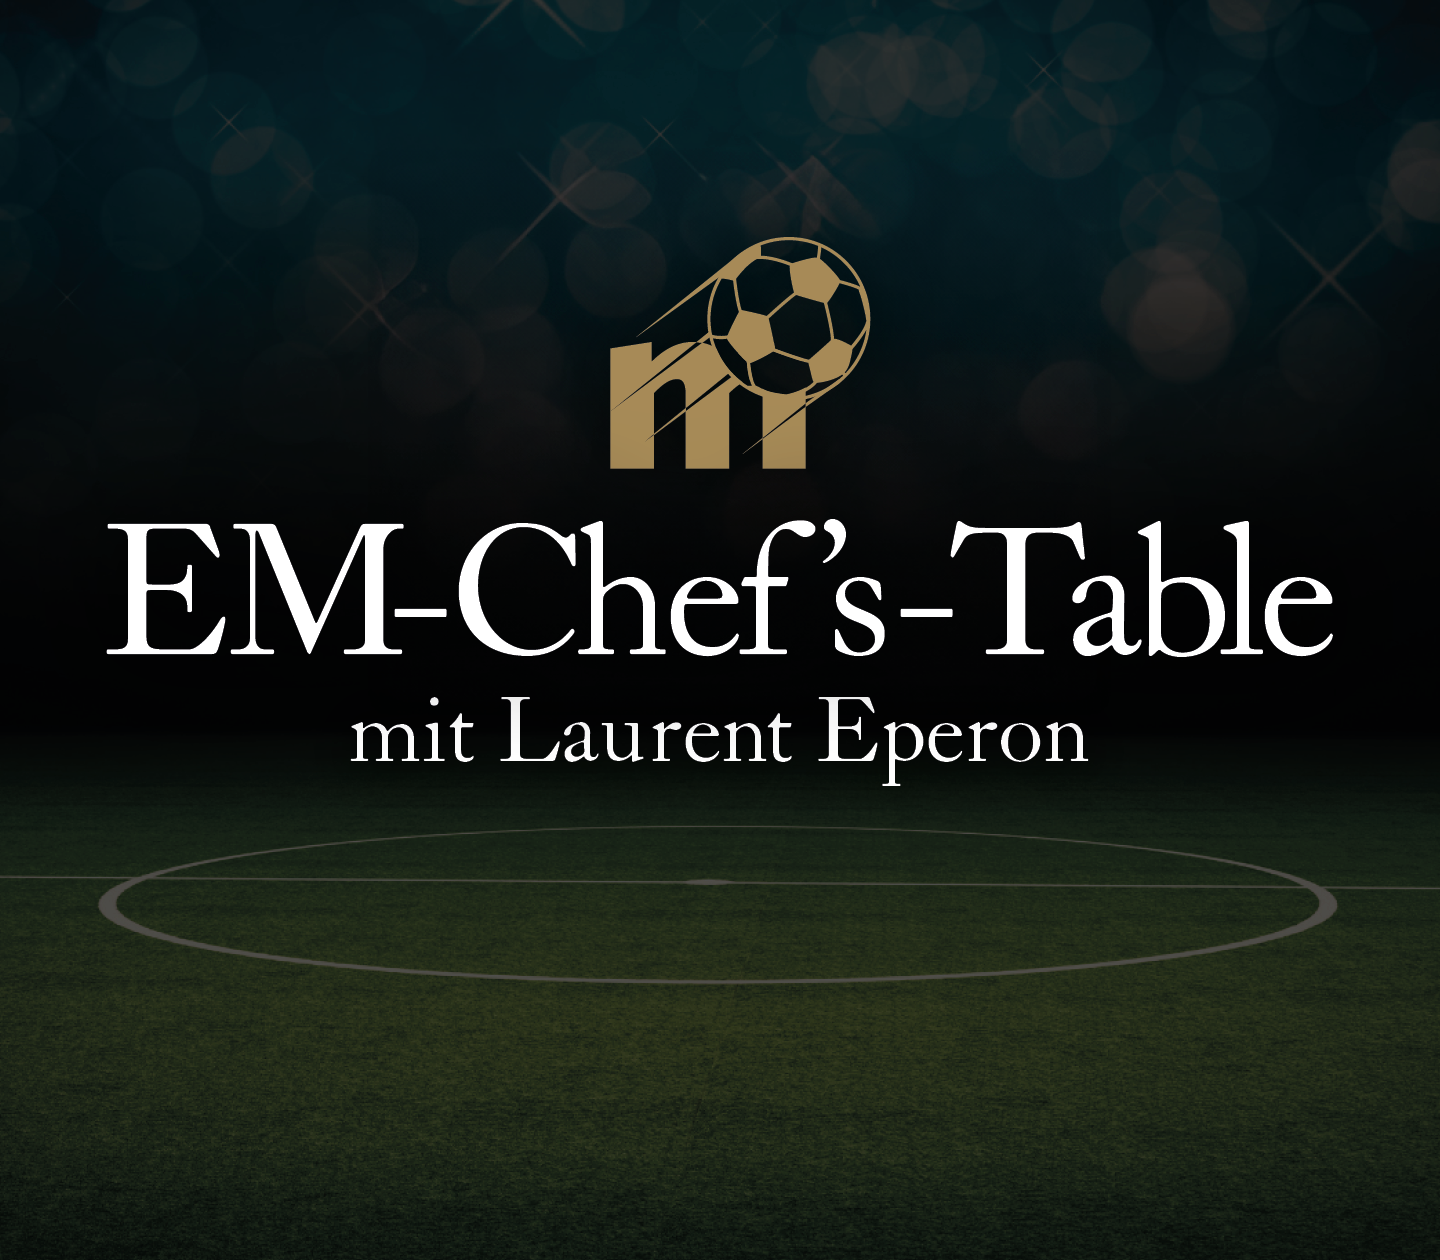 EM-Chef's-Table